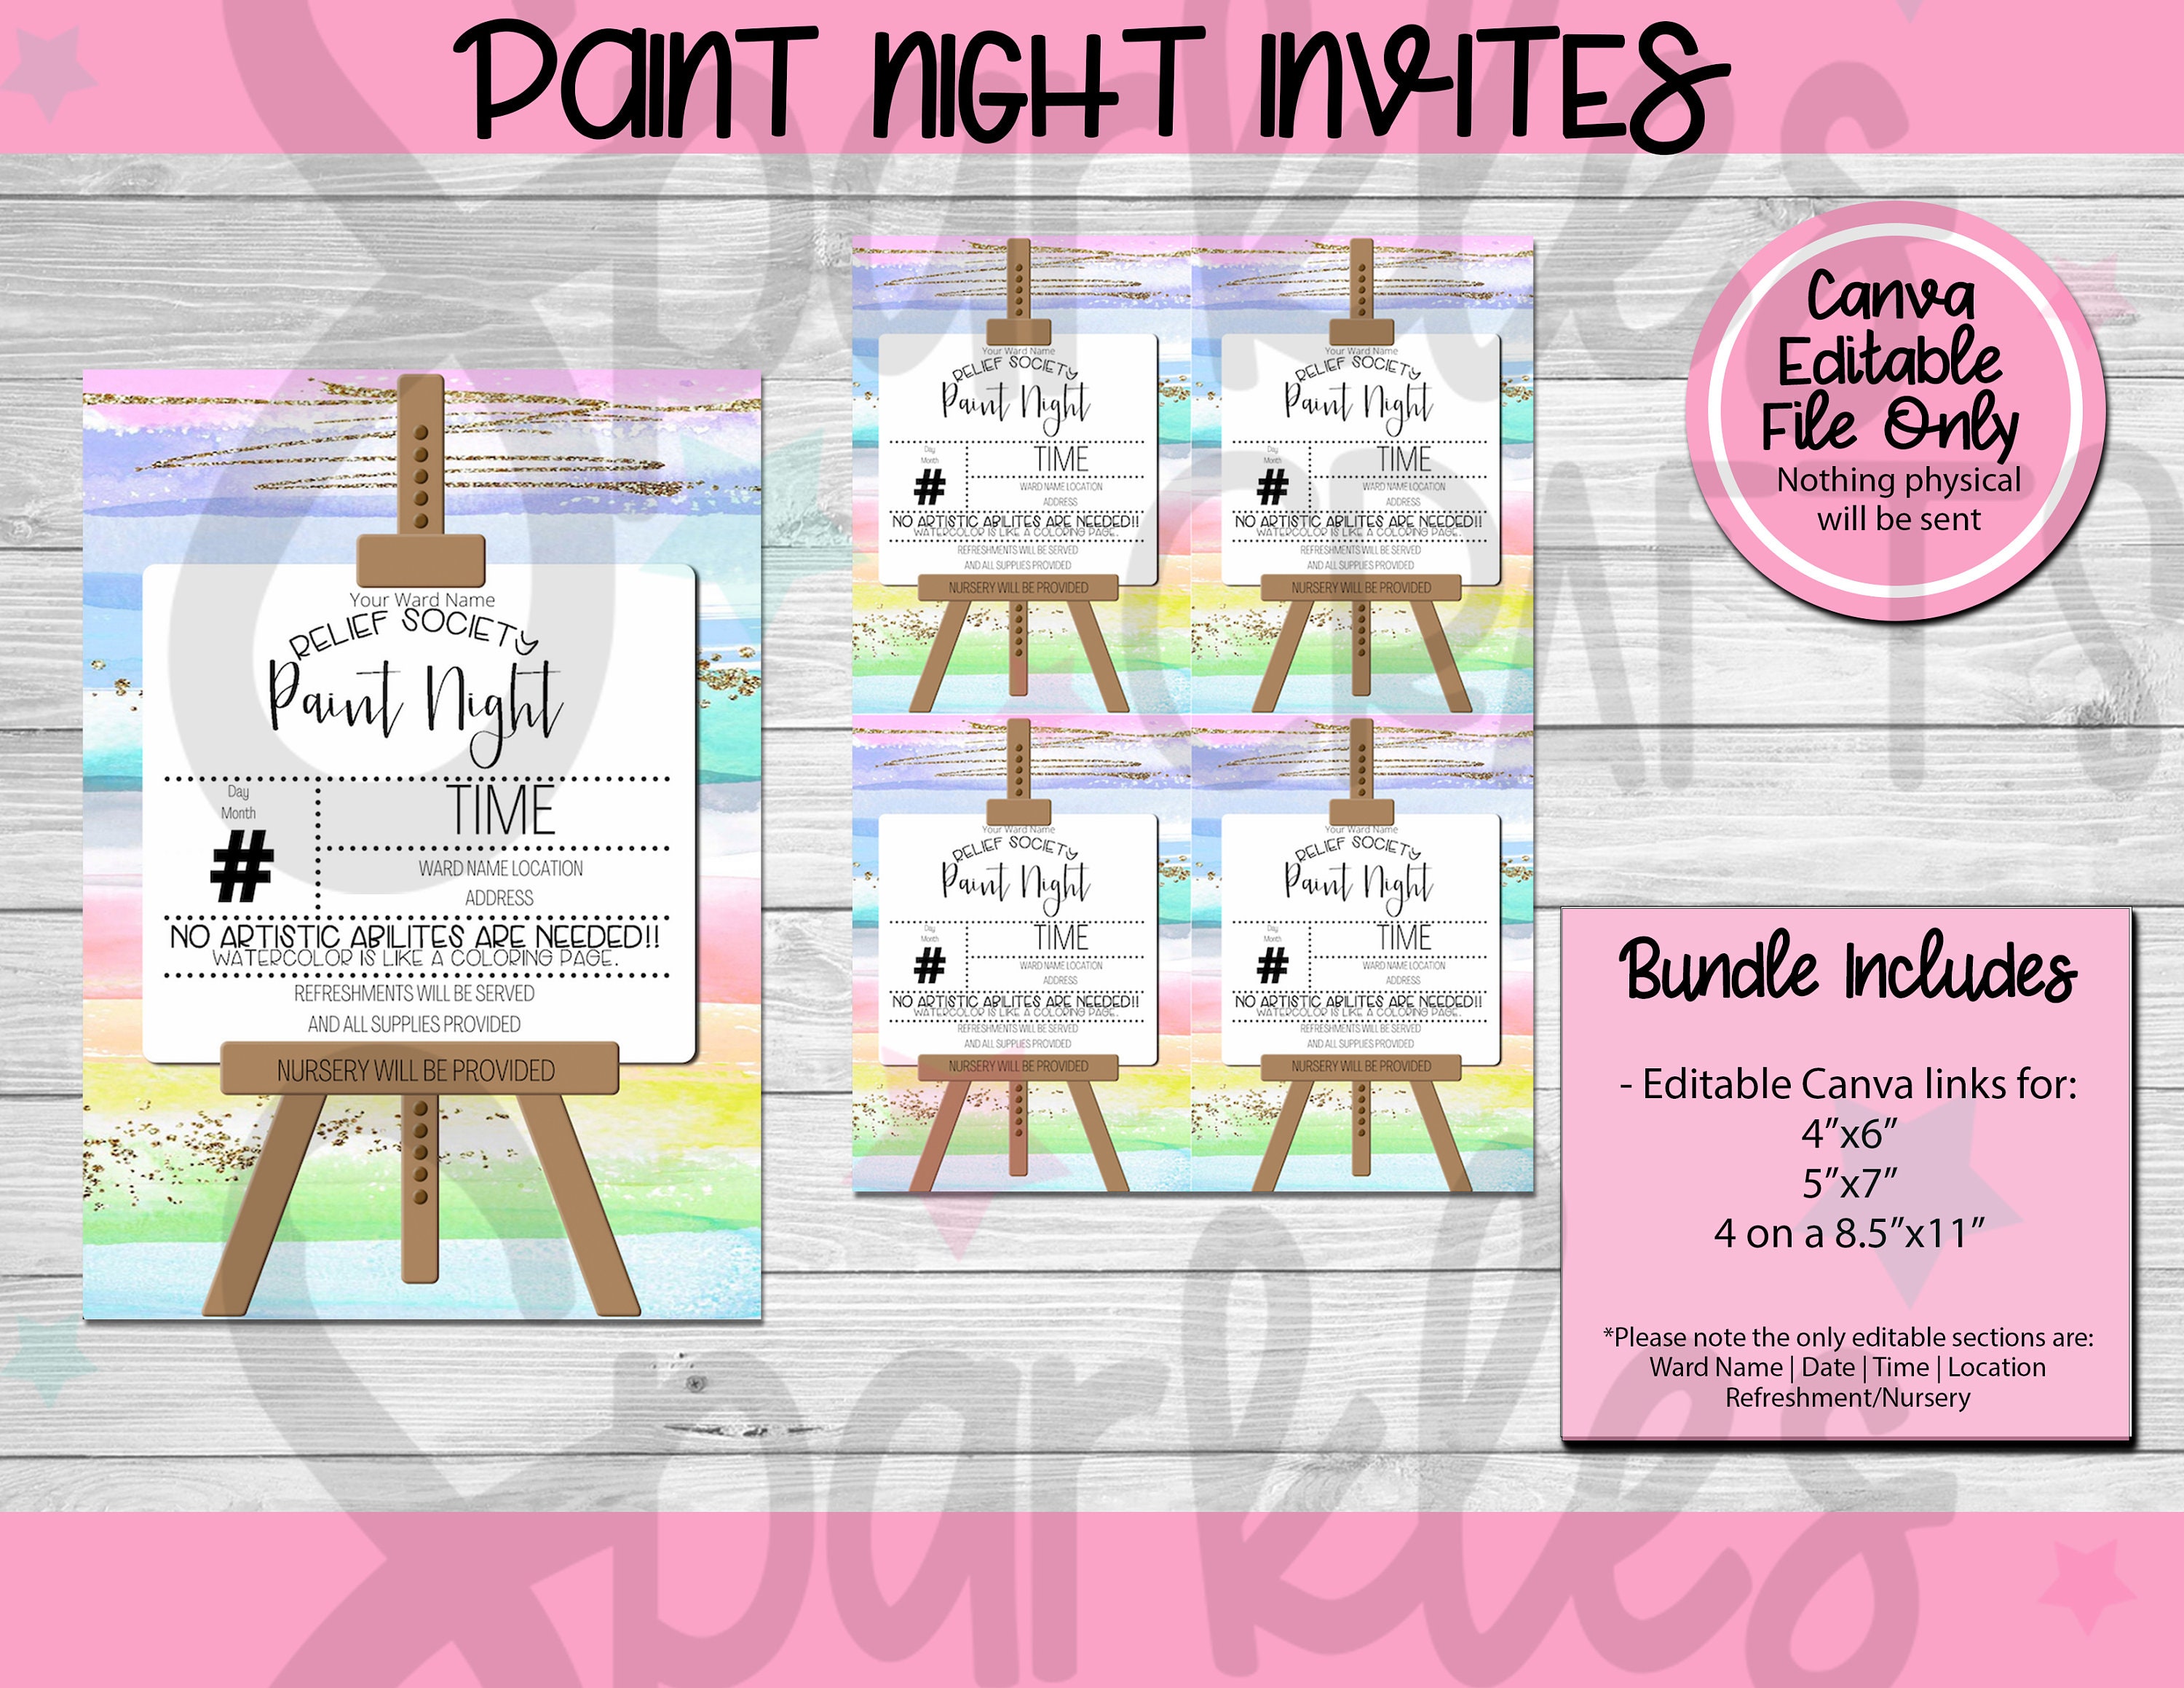 Date Night Paint Party Kit 